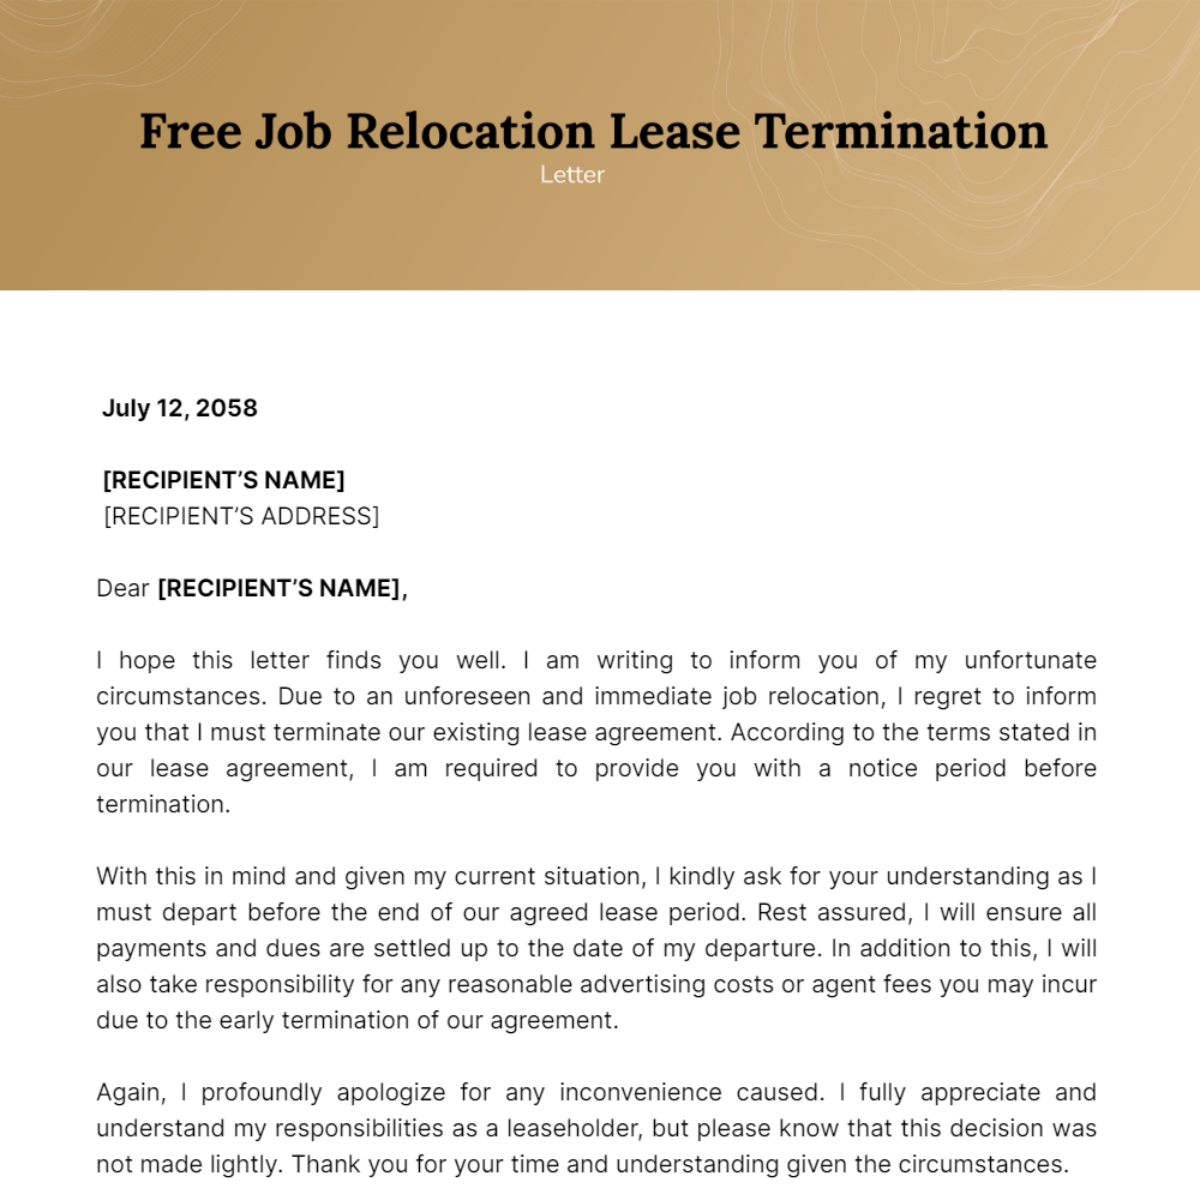 Job Relocation Lease Termination Letter Template